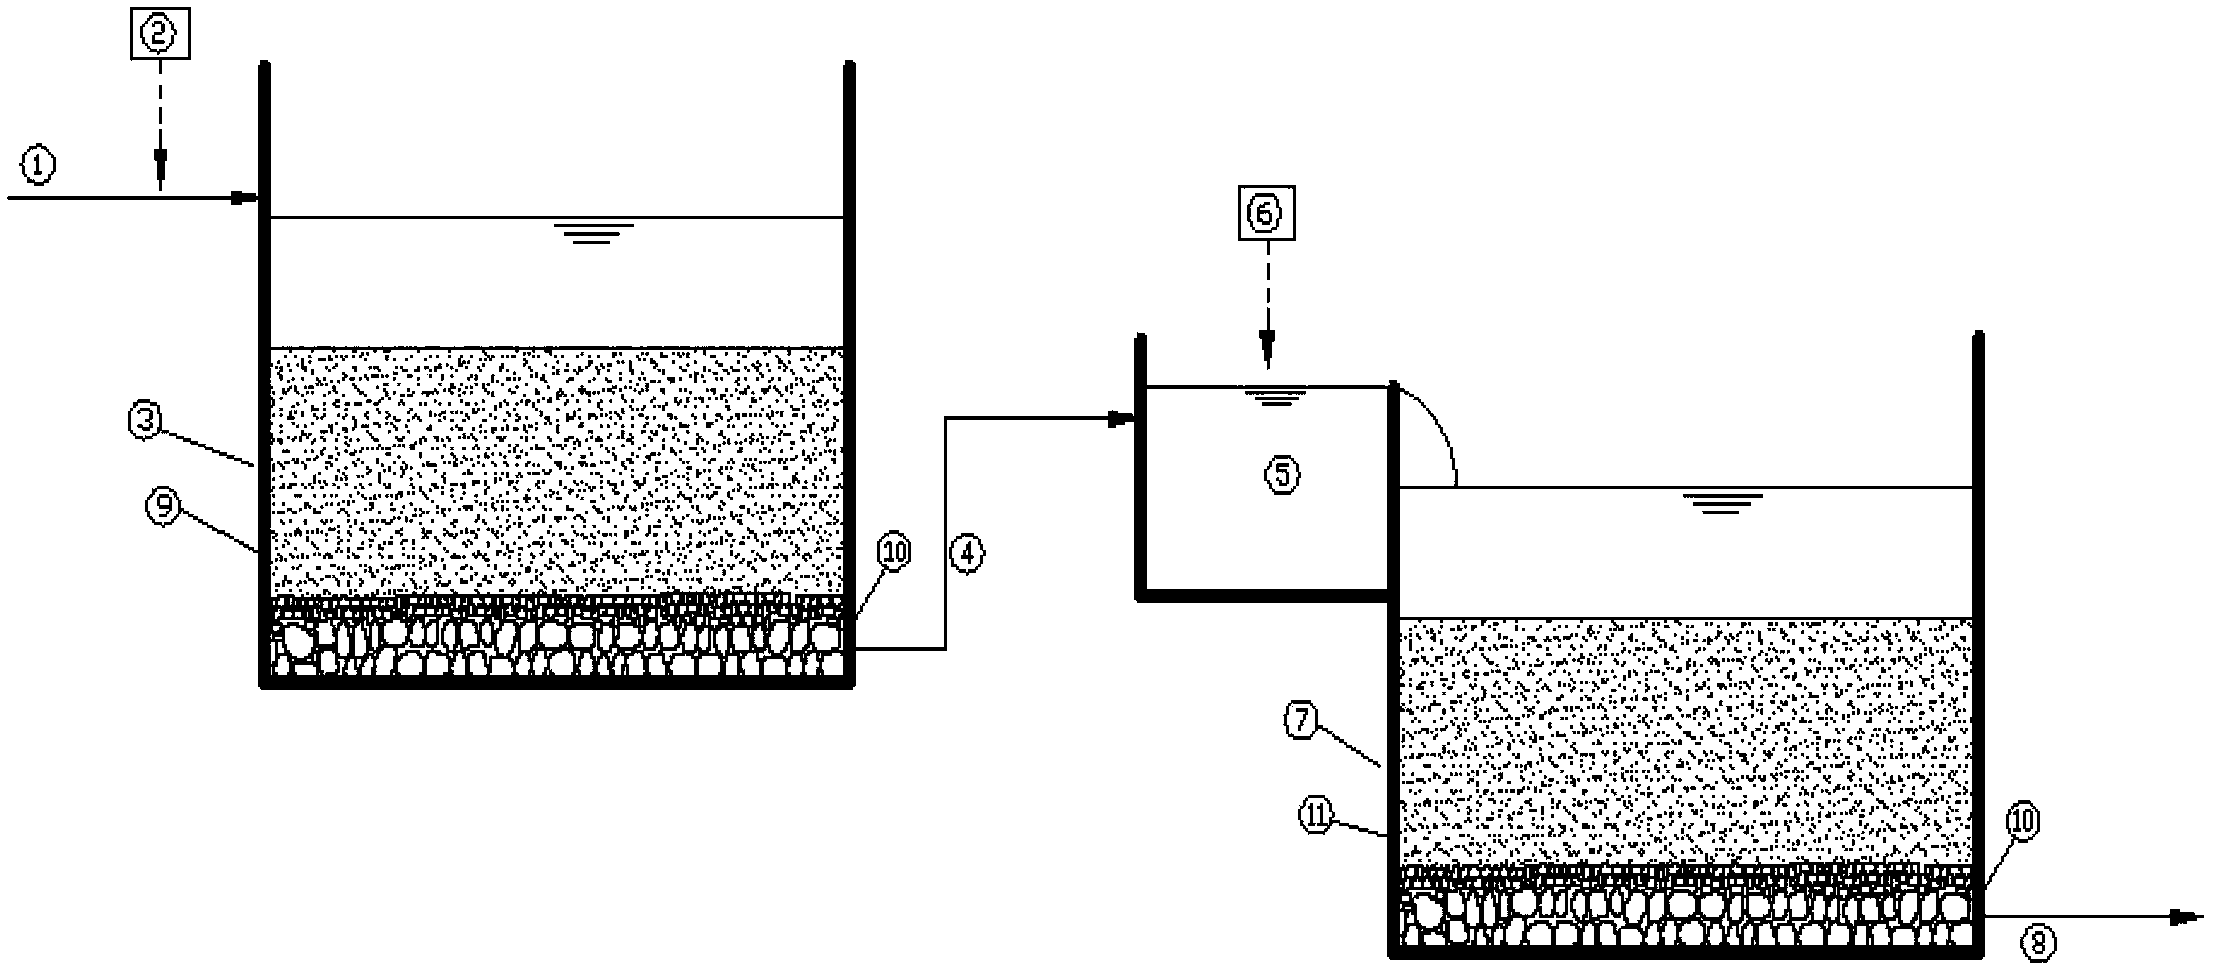 Device and method for biologically treating cadmium in wastewater